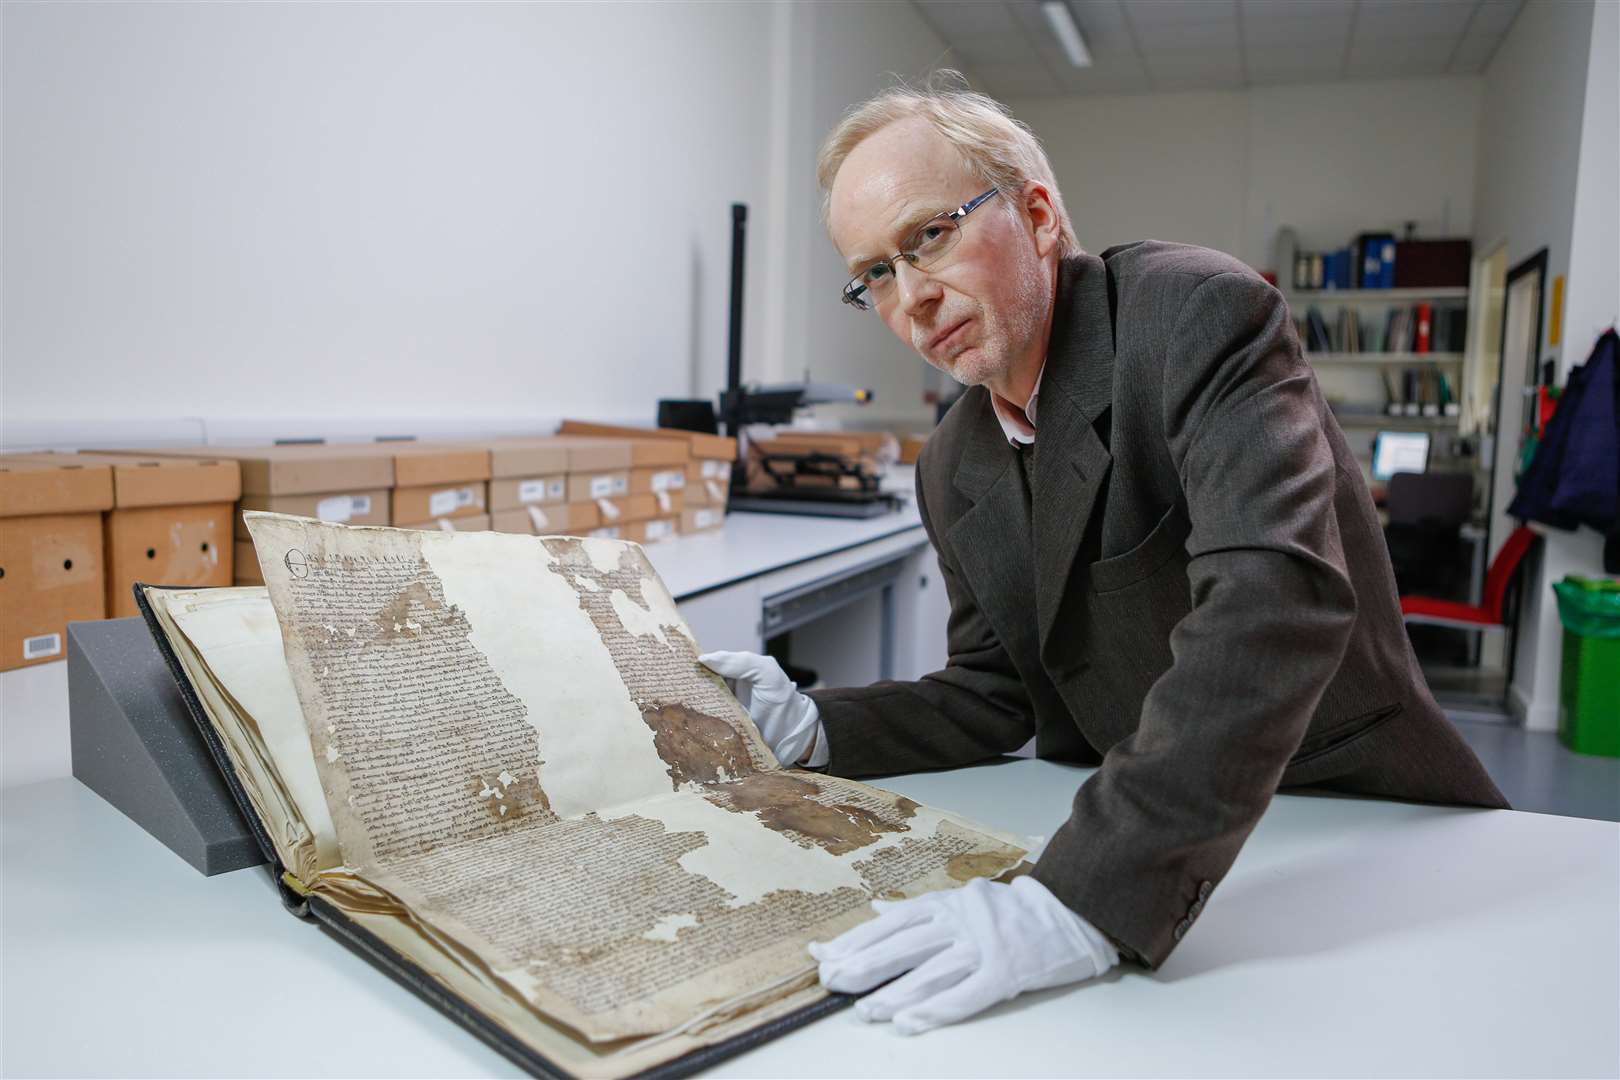 Dr Mark Bateson who discovered the Sandwich Magna Carta in the Maidstone Archives.